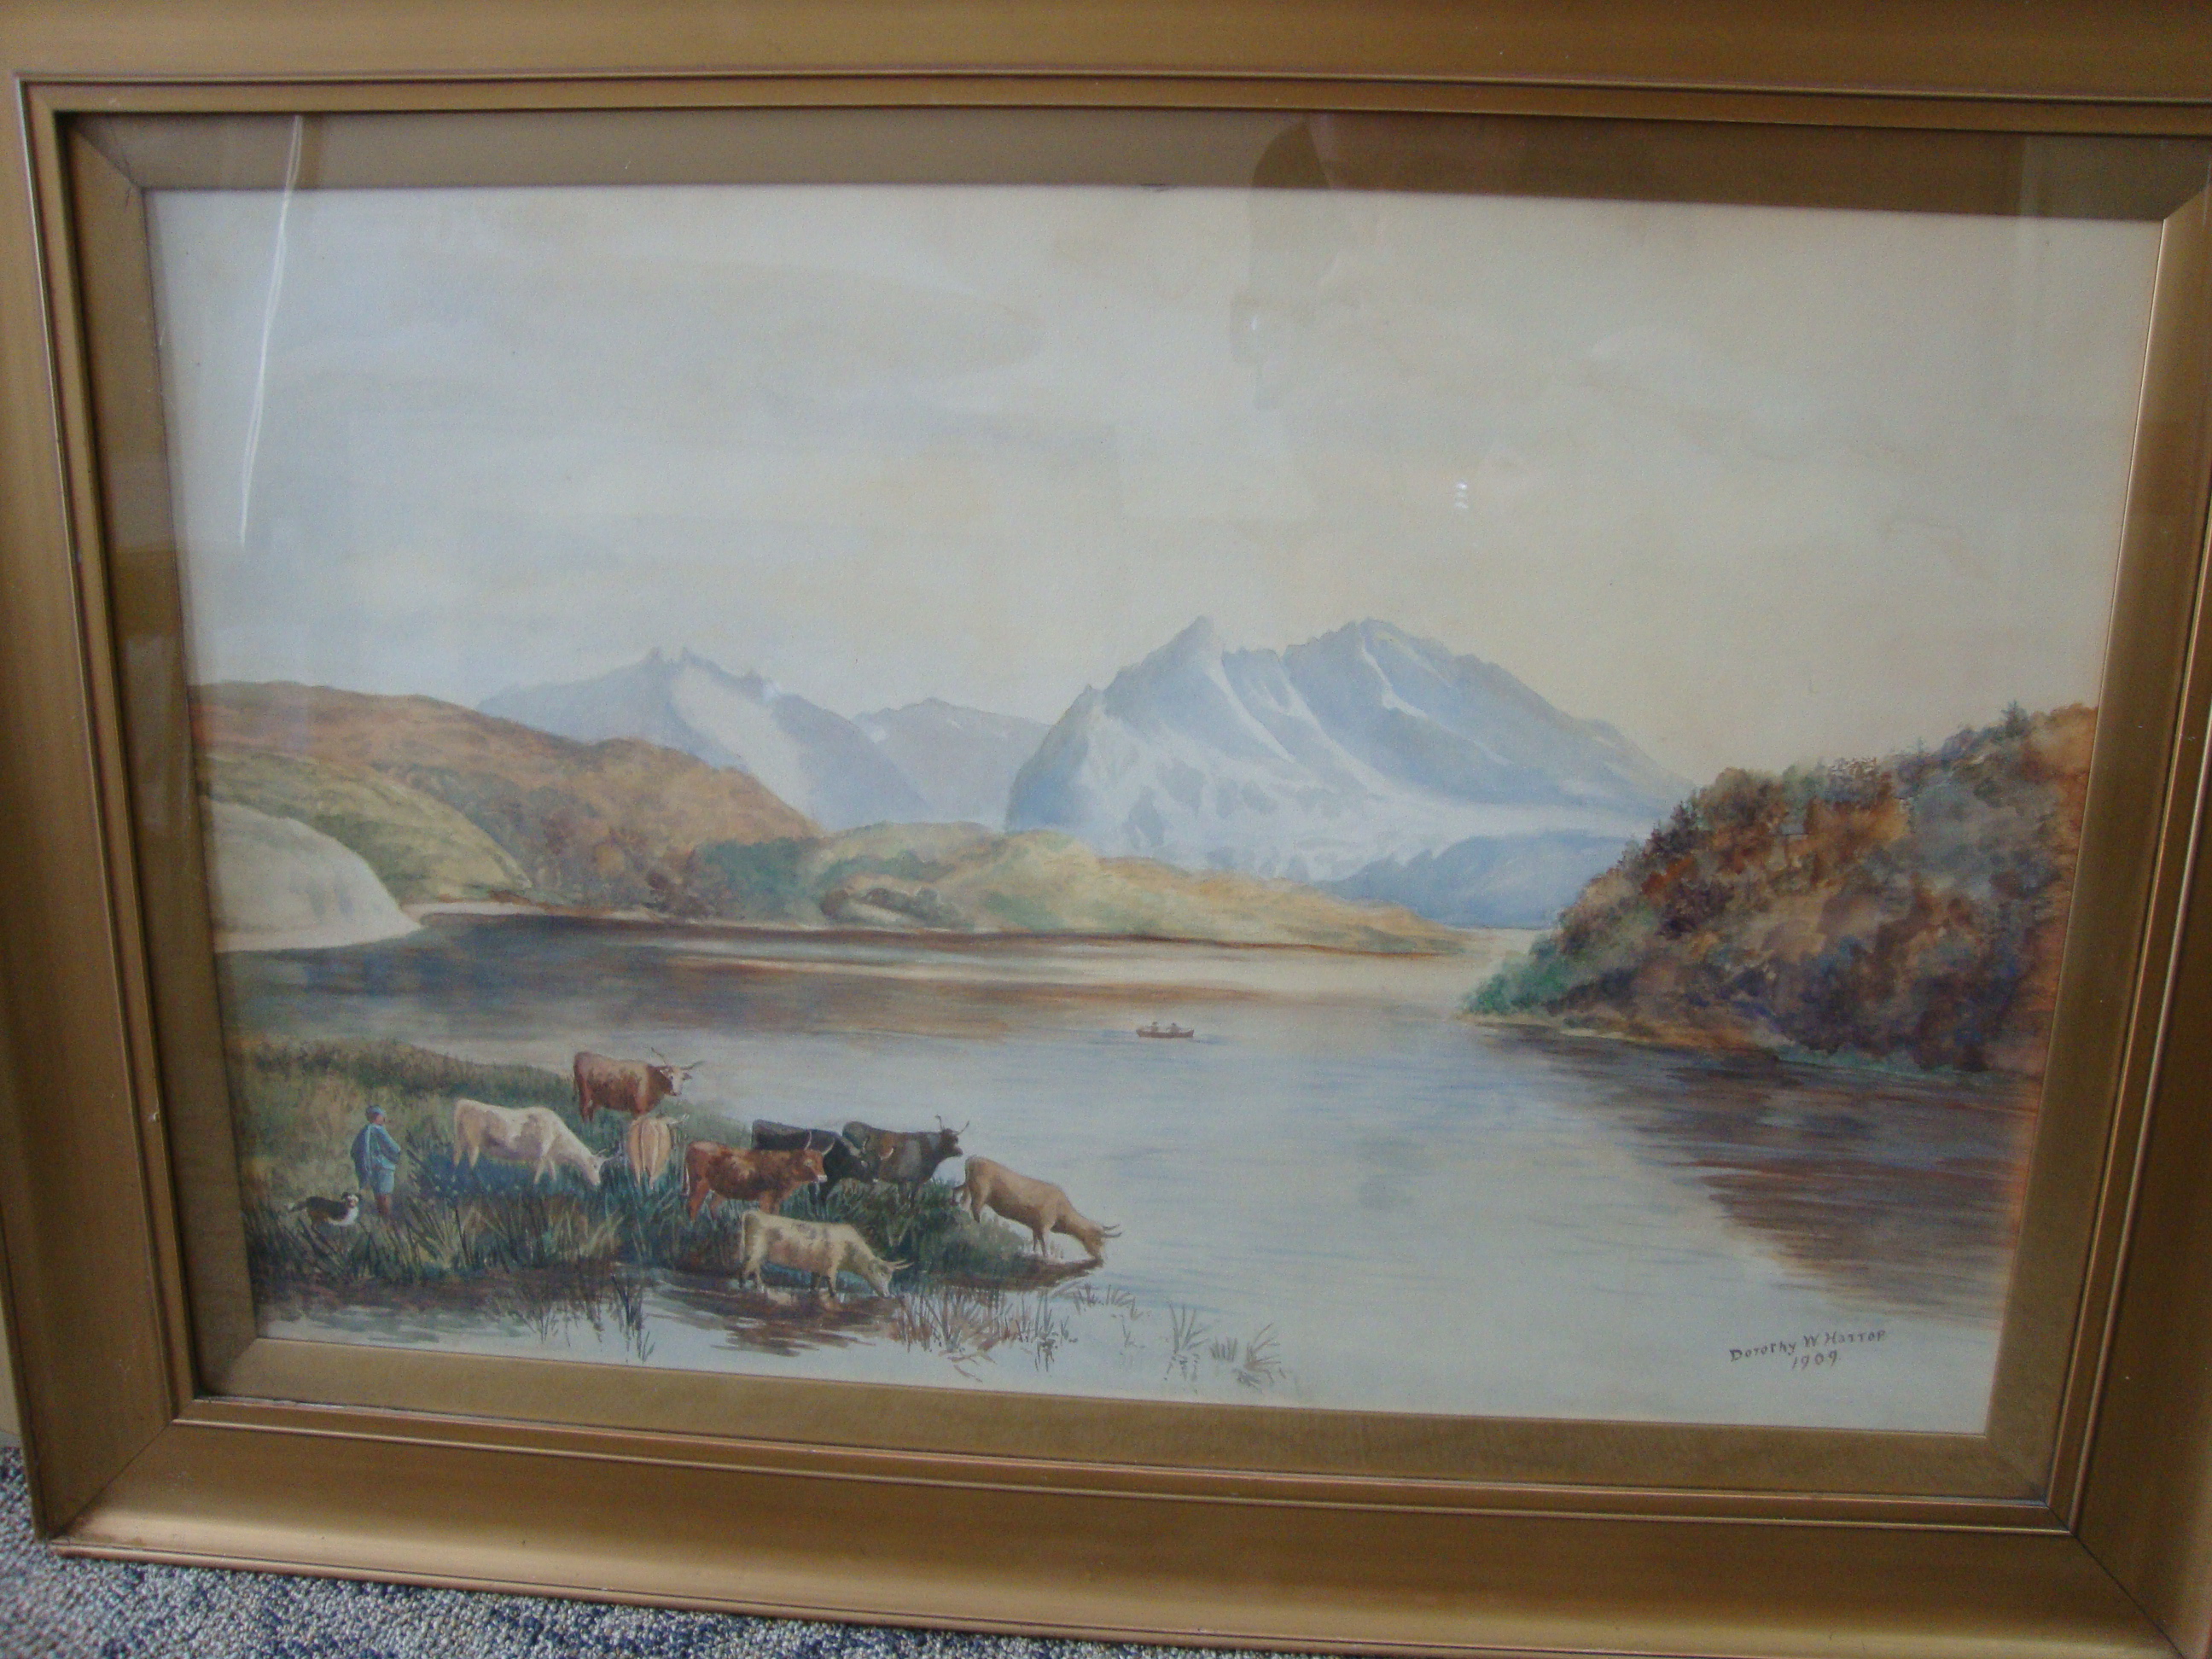 Dorothy W Hattop - Highland Scene, watercolour. 32" x 21". Signed on front "Dorothy W Hattop - Image 3 of 5